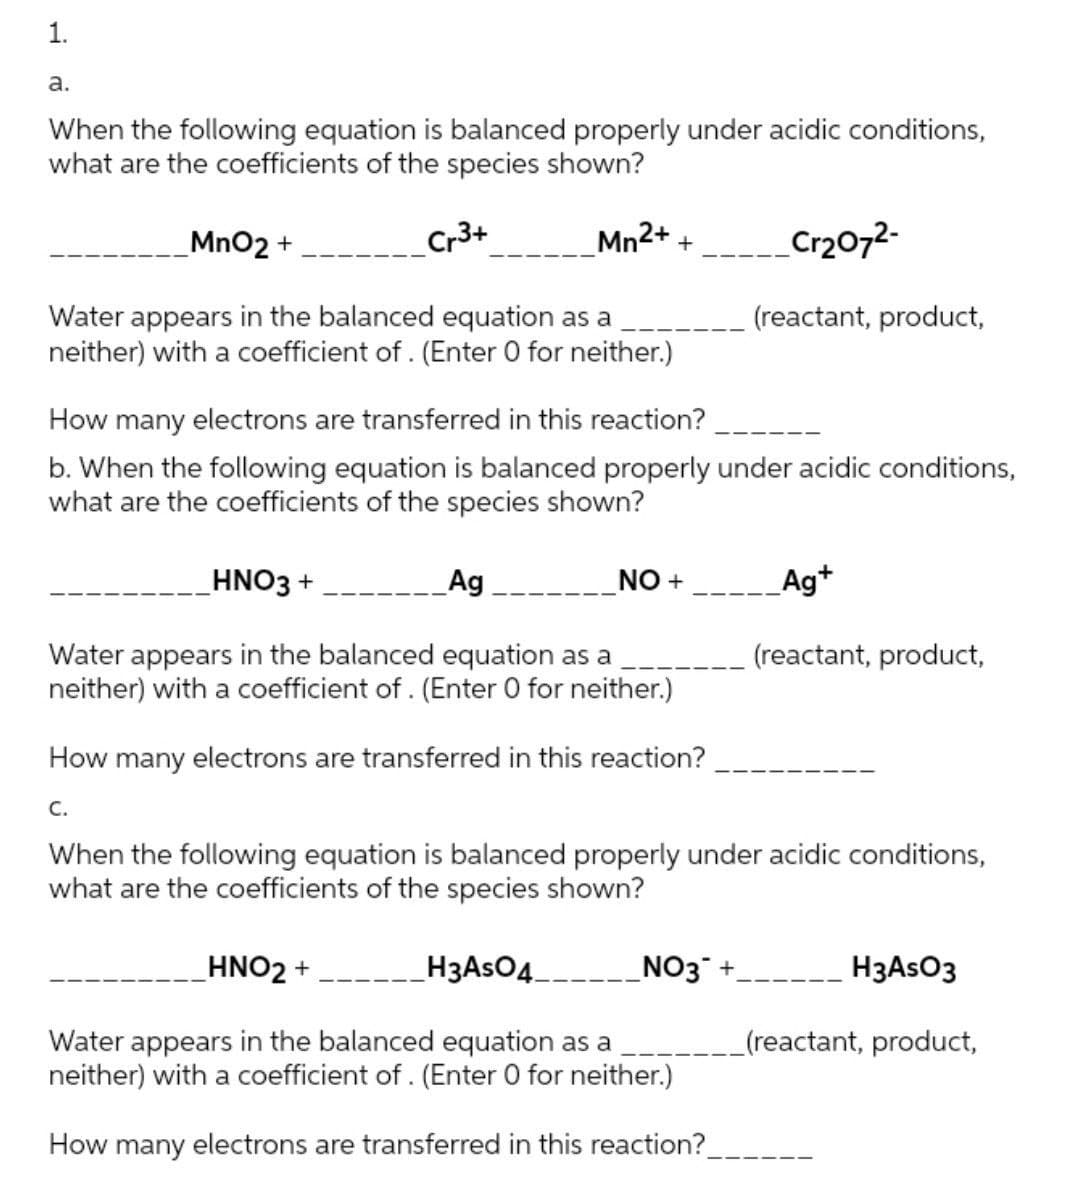 1.
а.
When the following equation is balanced properly under acidic conditions,
what are the coefficients of the species shown?
MnO2 +
Cr3+
Mn2+ +
Cr2072-
Water appears in the balanced equation as a
neither) with a coefficient of . (Enter 0 for neither.)
(reactant, product,
How many electrons are transferred in this reaction?
b. When the following equation is balanced properly under acidic conditions,
what are the coefficients of the species shown?
HNO3 +
Ag
--__NO +
Ag+
(reactant, product,
Water appears in the balanced equation as a
neither) with a coefficient of . (Enter 0 for neither.)
How many electrons are transferred in this reaction?
C.
When the following equation is balanced properly under acidic conditions,
what are the coefficients of the species shown?
HNO2 +
H3ASO4
NO3 +.
H3ASO3
Water appears in the balanced equation as a
neither) with a coefficient of . (Enter 0 for neither.)
(reactant, product,
How many electrons are transferred in this reaction?.
